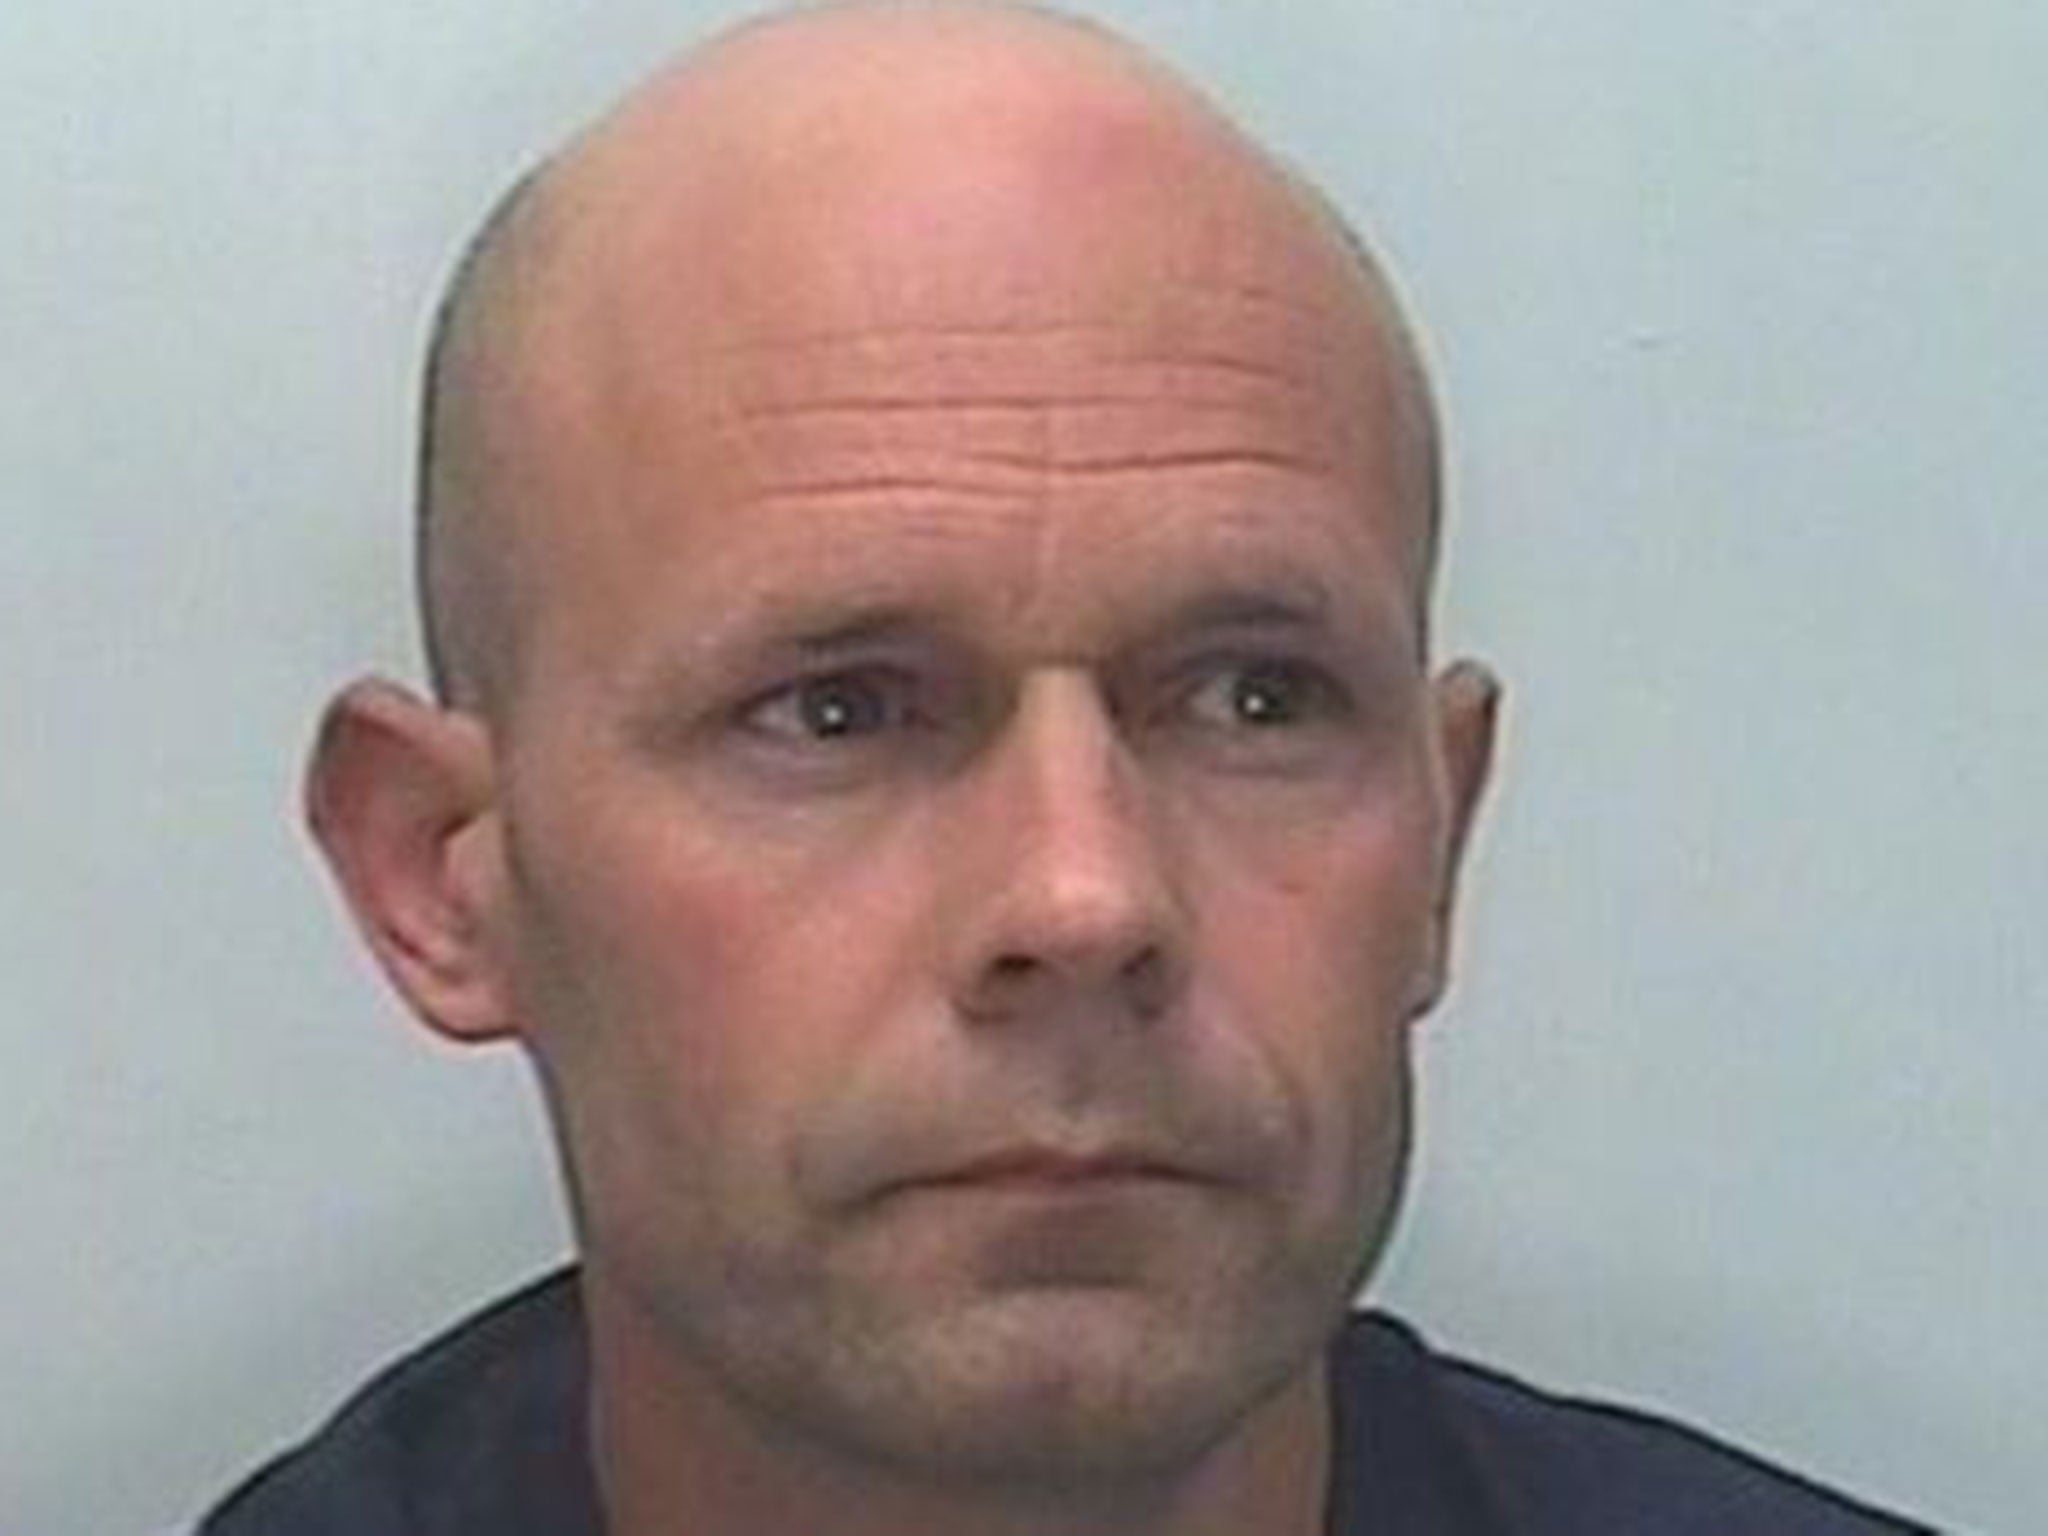 Revenge Wife Porn - Man jailed for shooting wife's former lover after he posted ...